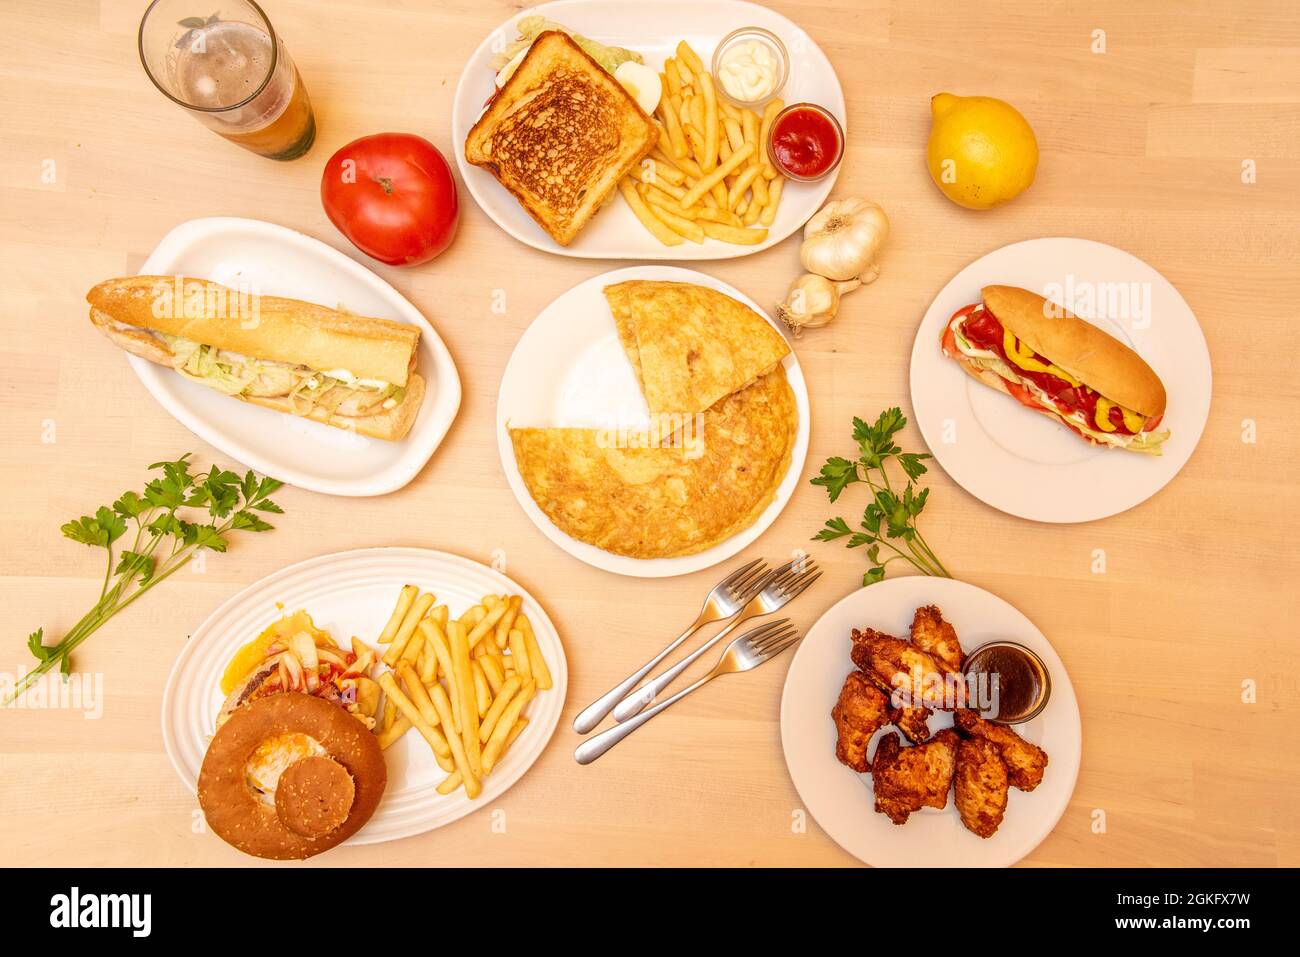 Dishes and snacks of a restaurant seen from the top. Chicken wings, puppy, burger, potato omelette, chicken sandwich. Stock Photo